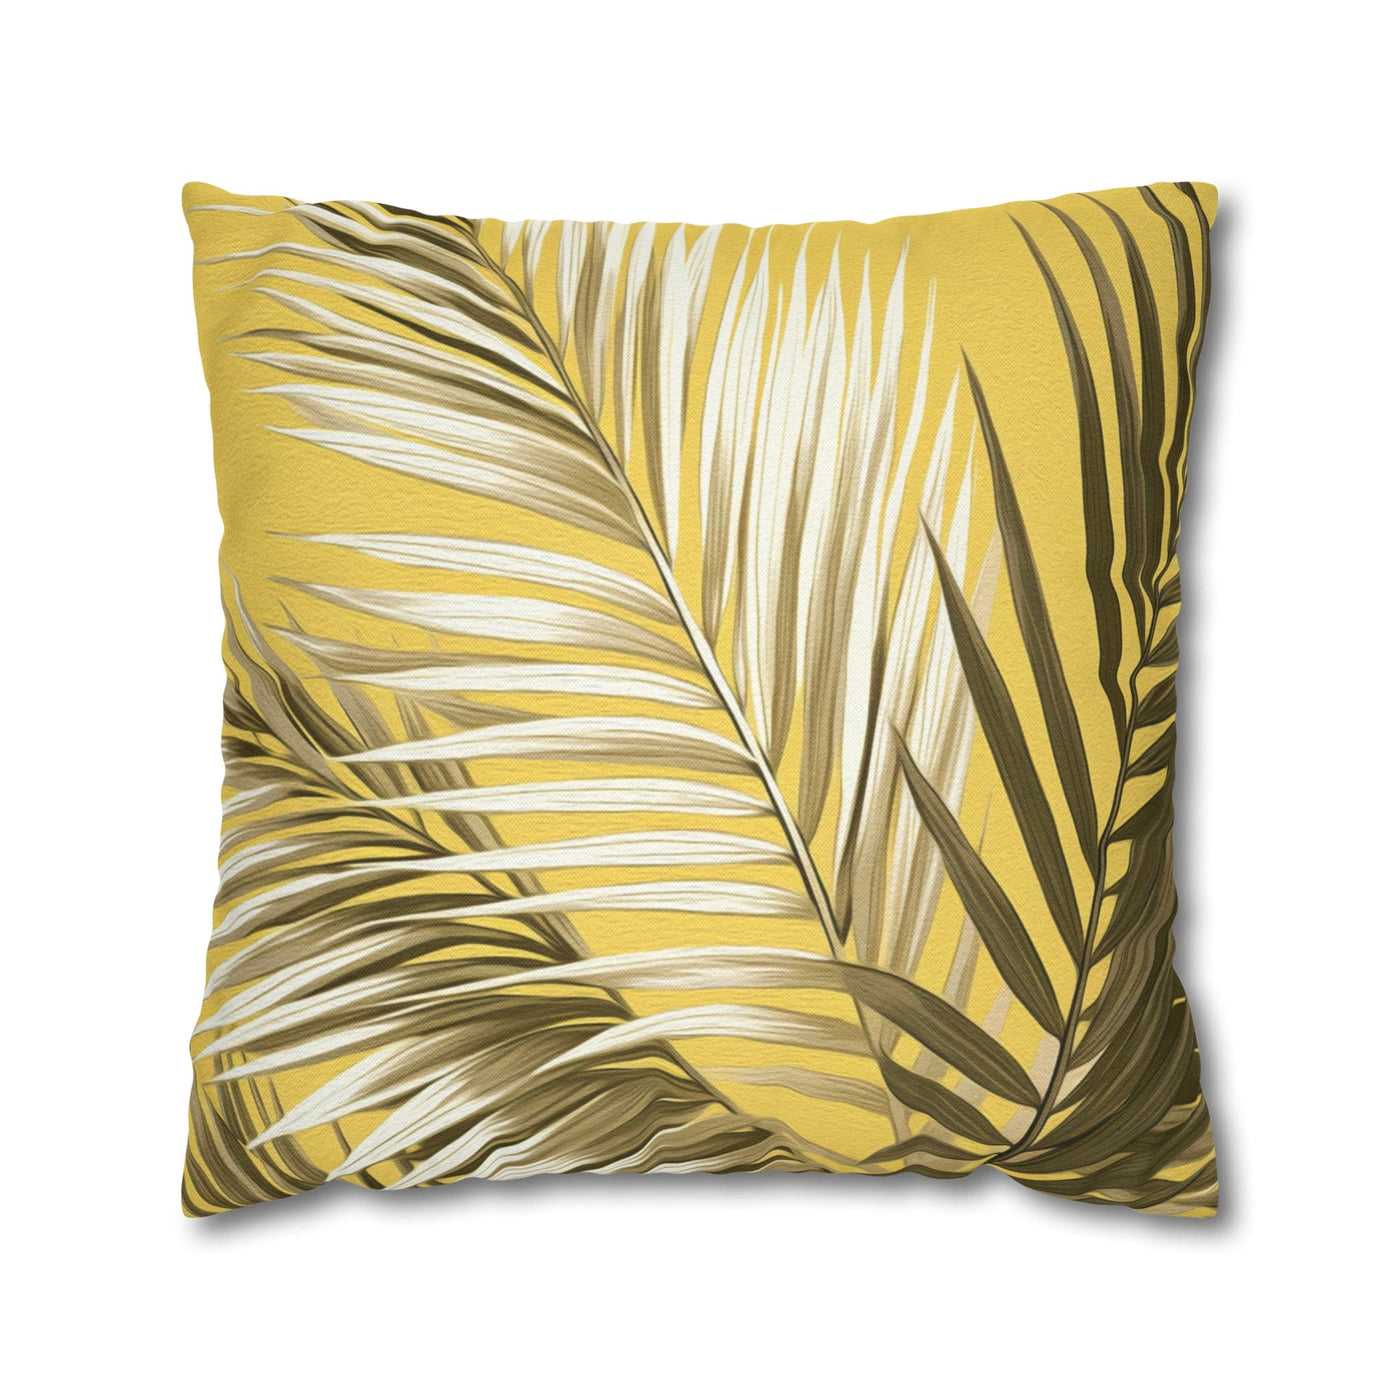 Decorative Throw Pillow Covers With Zipper - Set Of 2 Palm Tree Brown And White